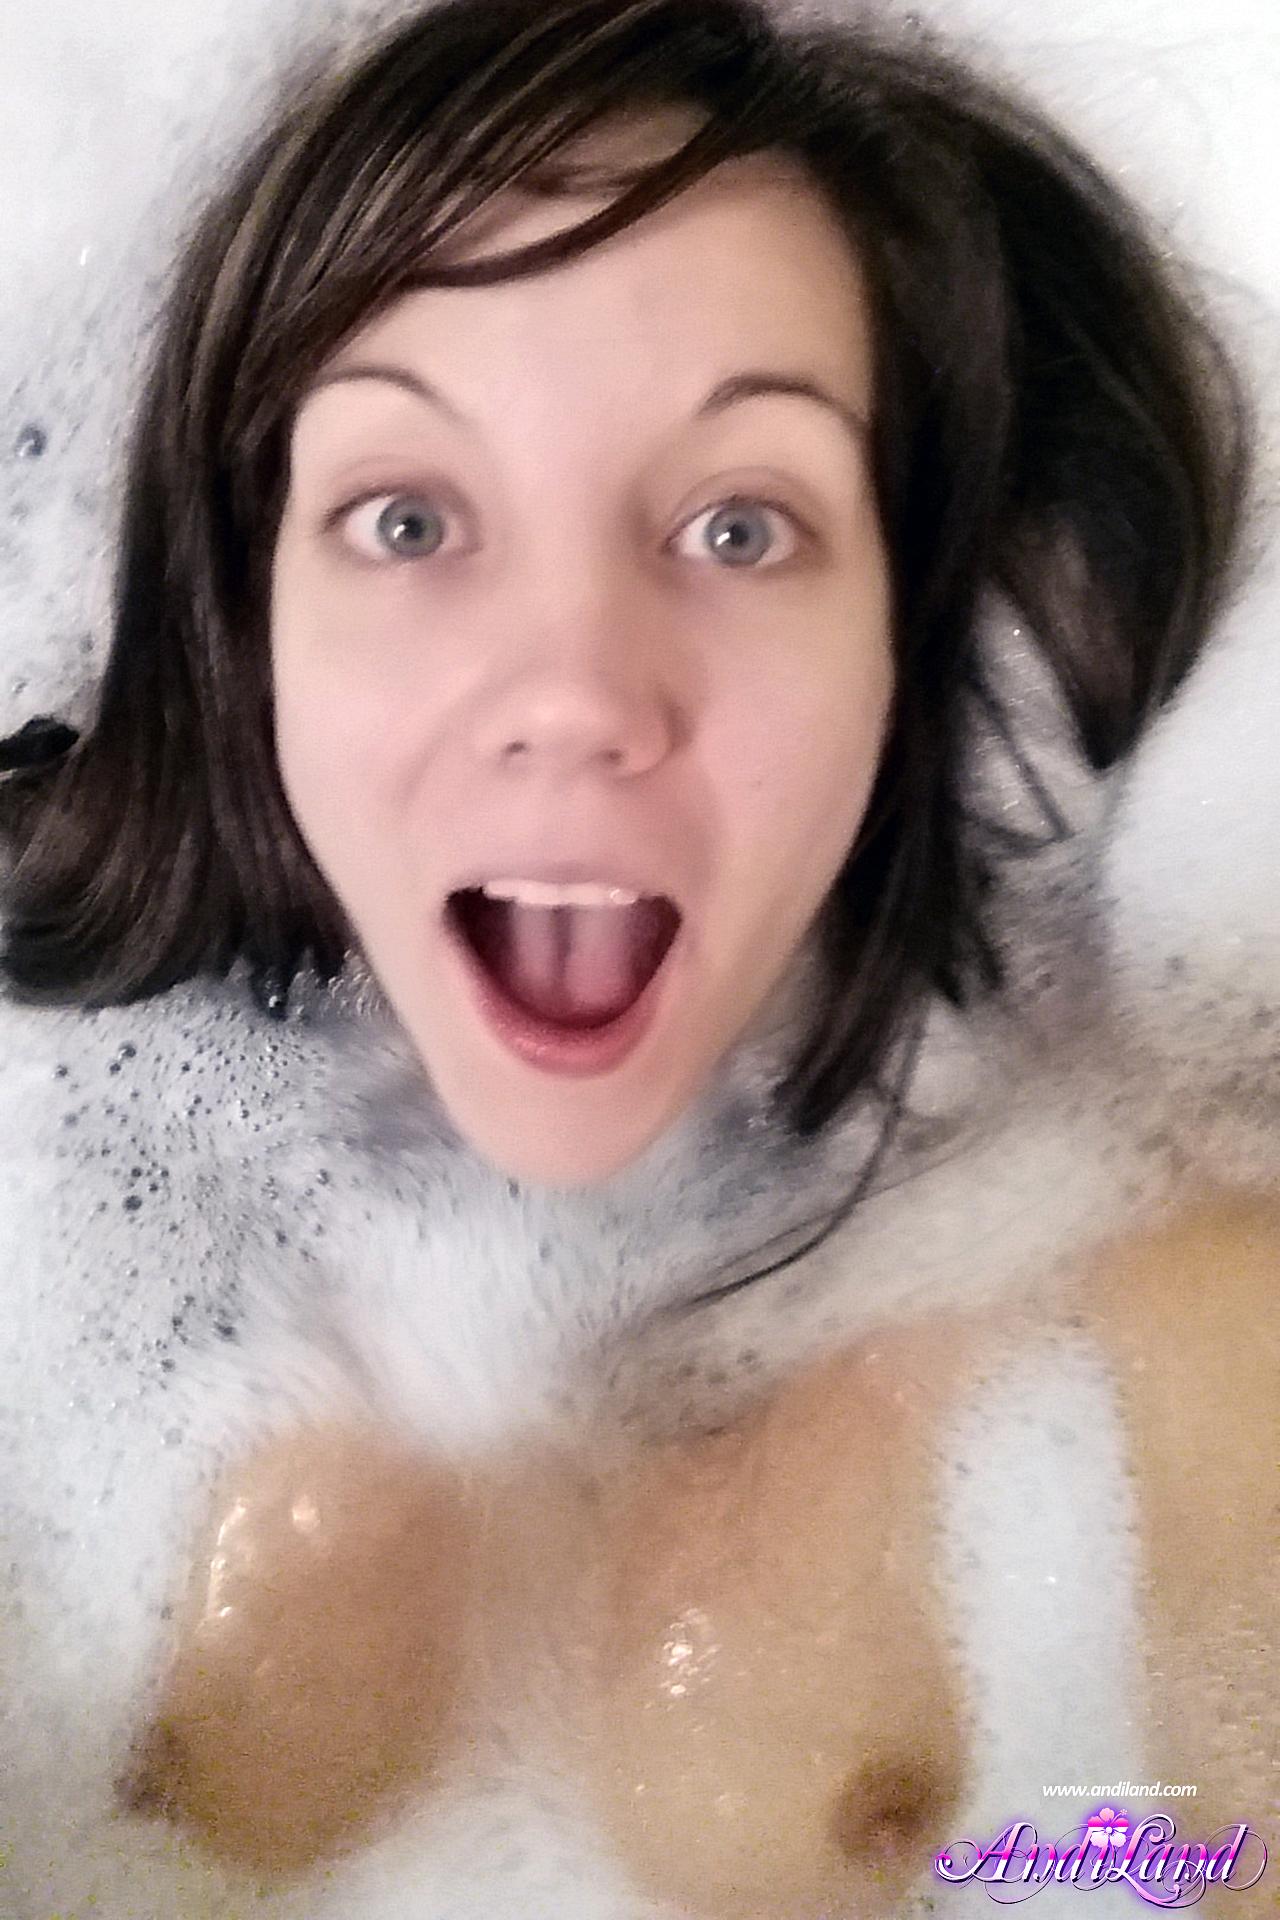 Andi Land takes some selfies for you in the bath #53135220